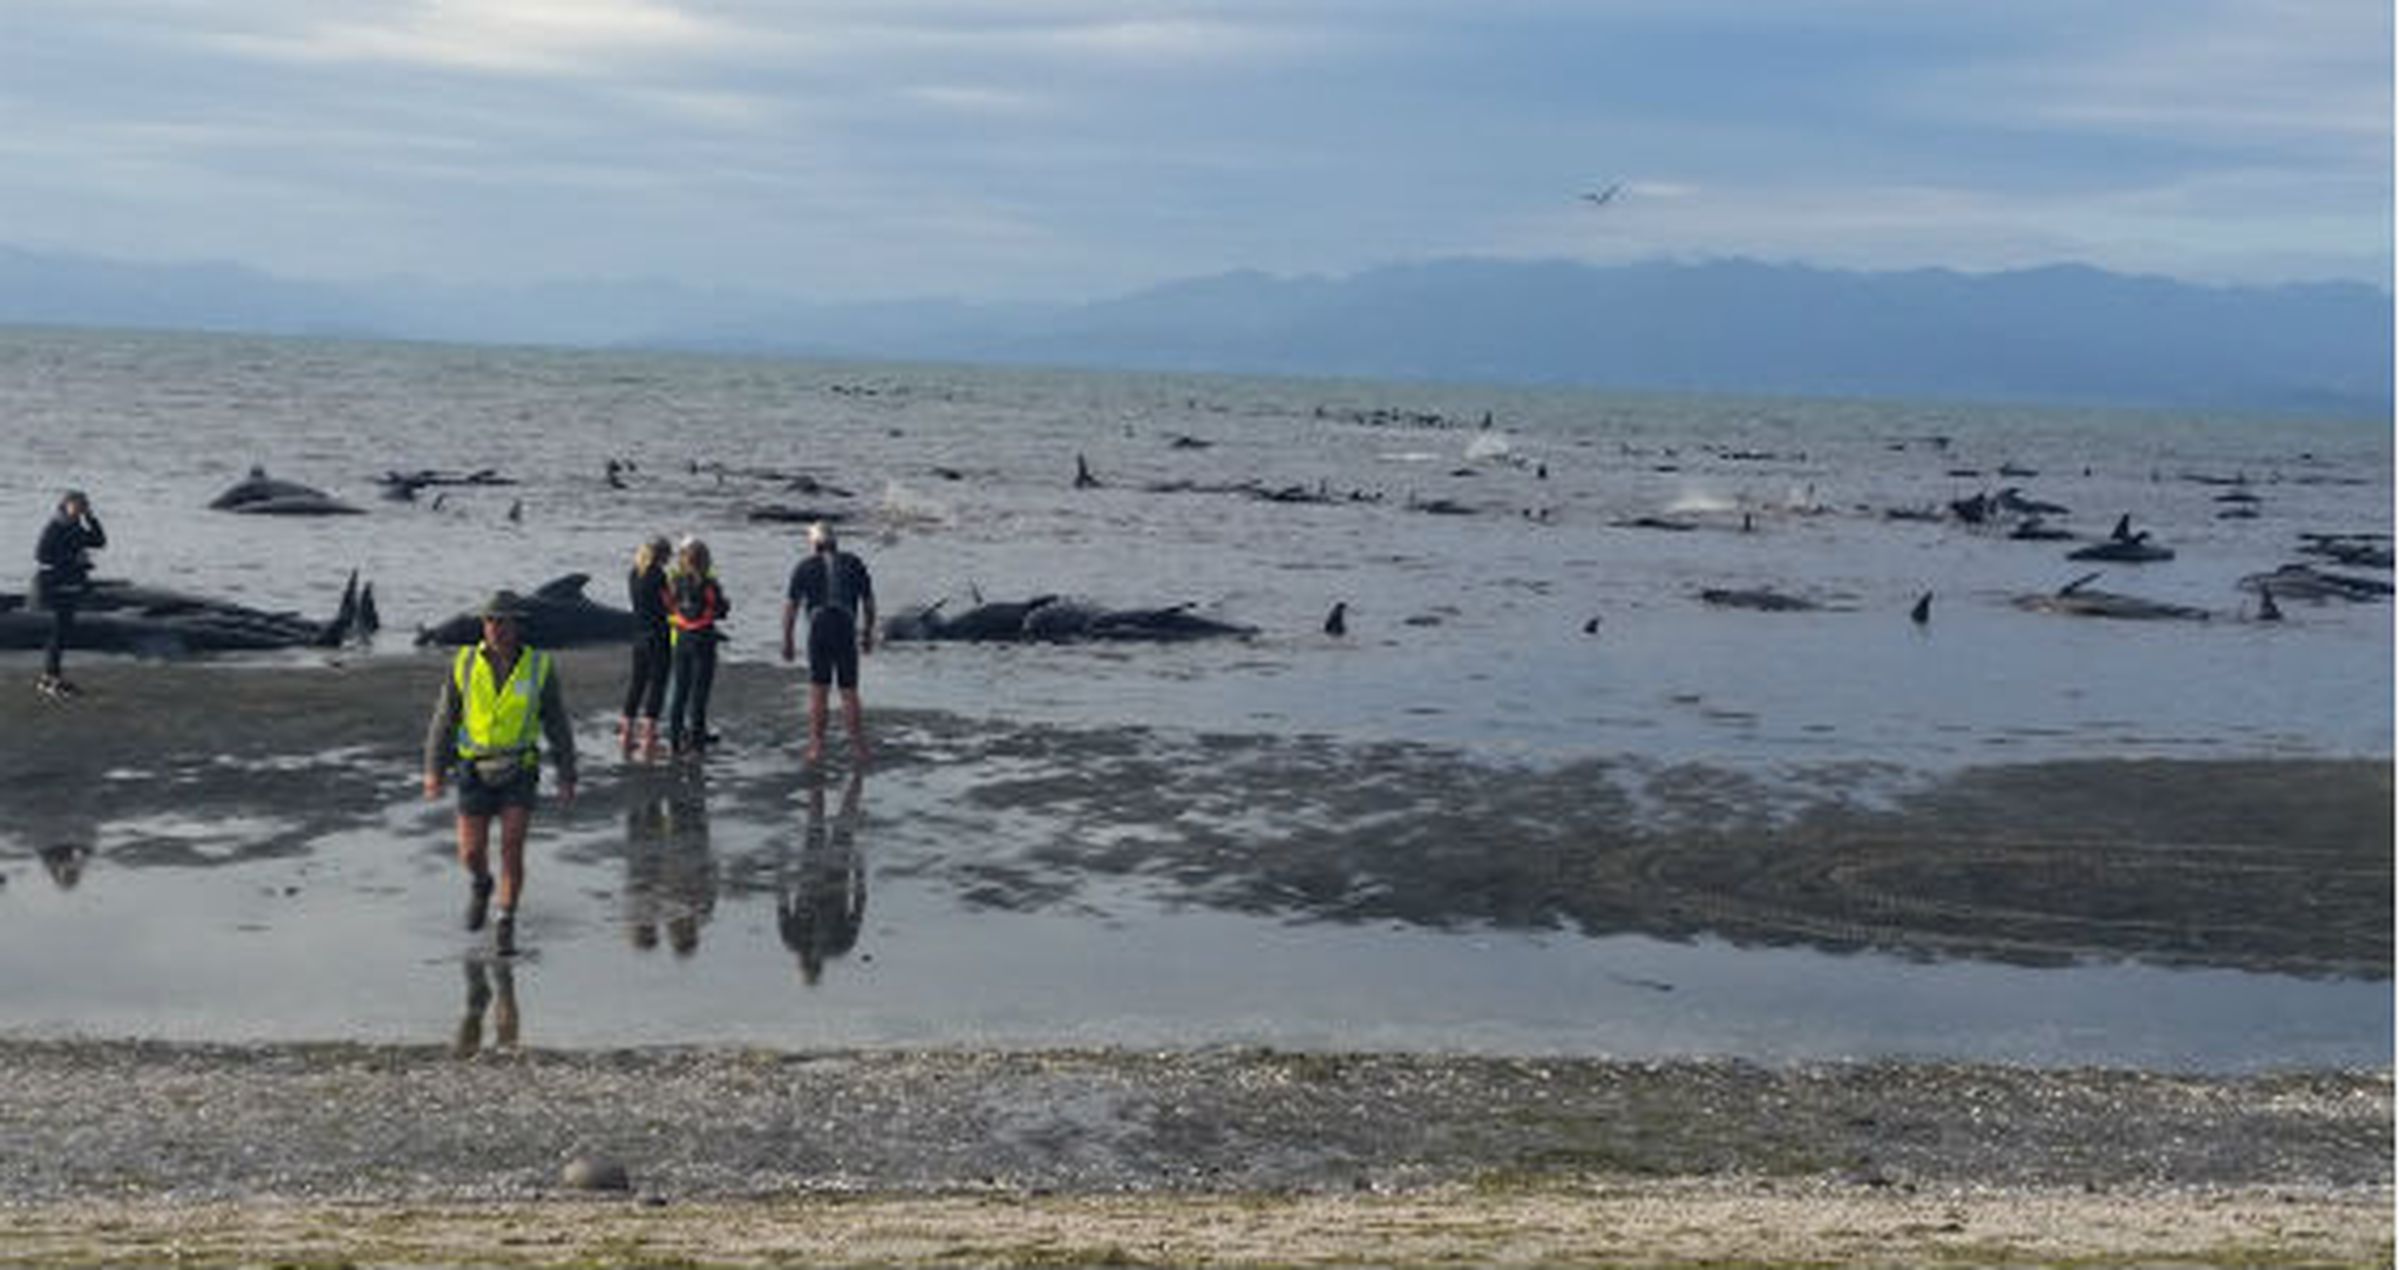 Pilot whales stranded on Farewell Spit, New Zealand. February 10, 2017. Photo: Deb Price/New Zealand Department of Conservation Media Release